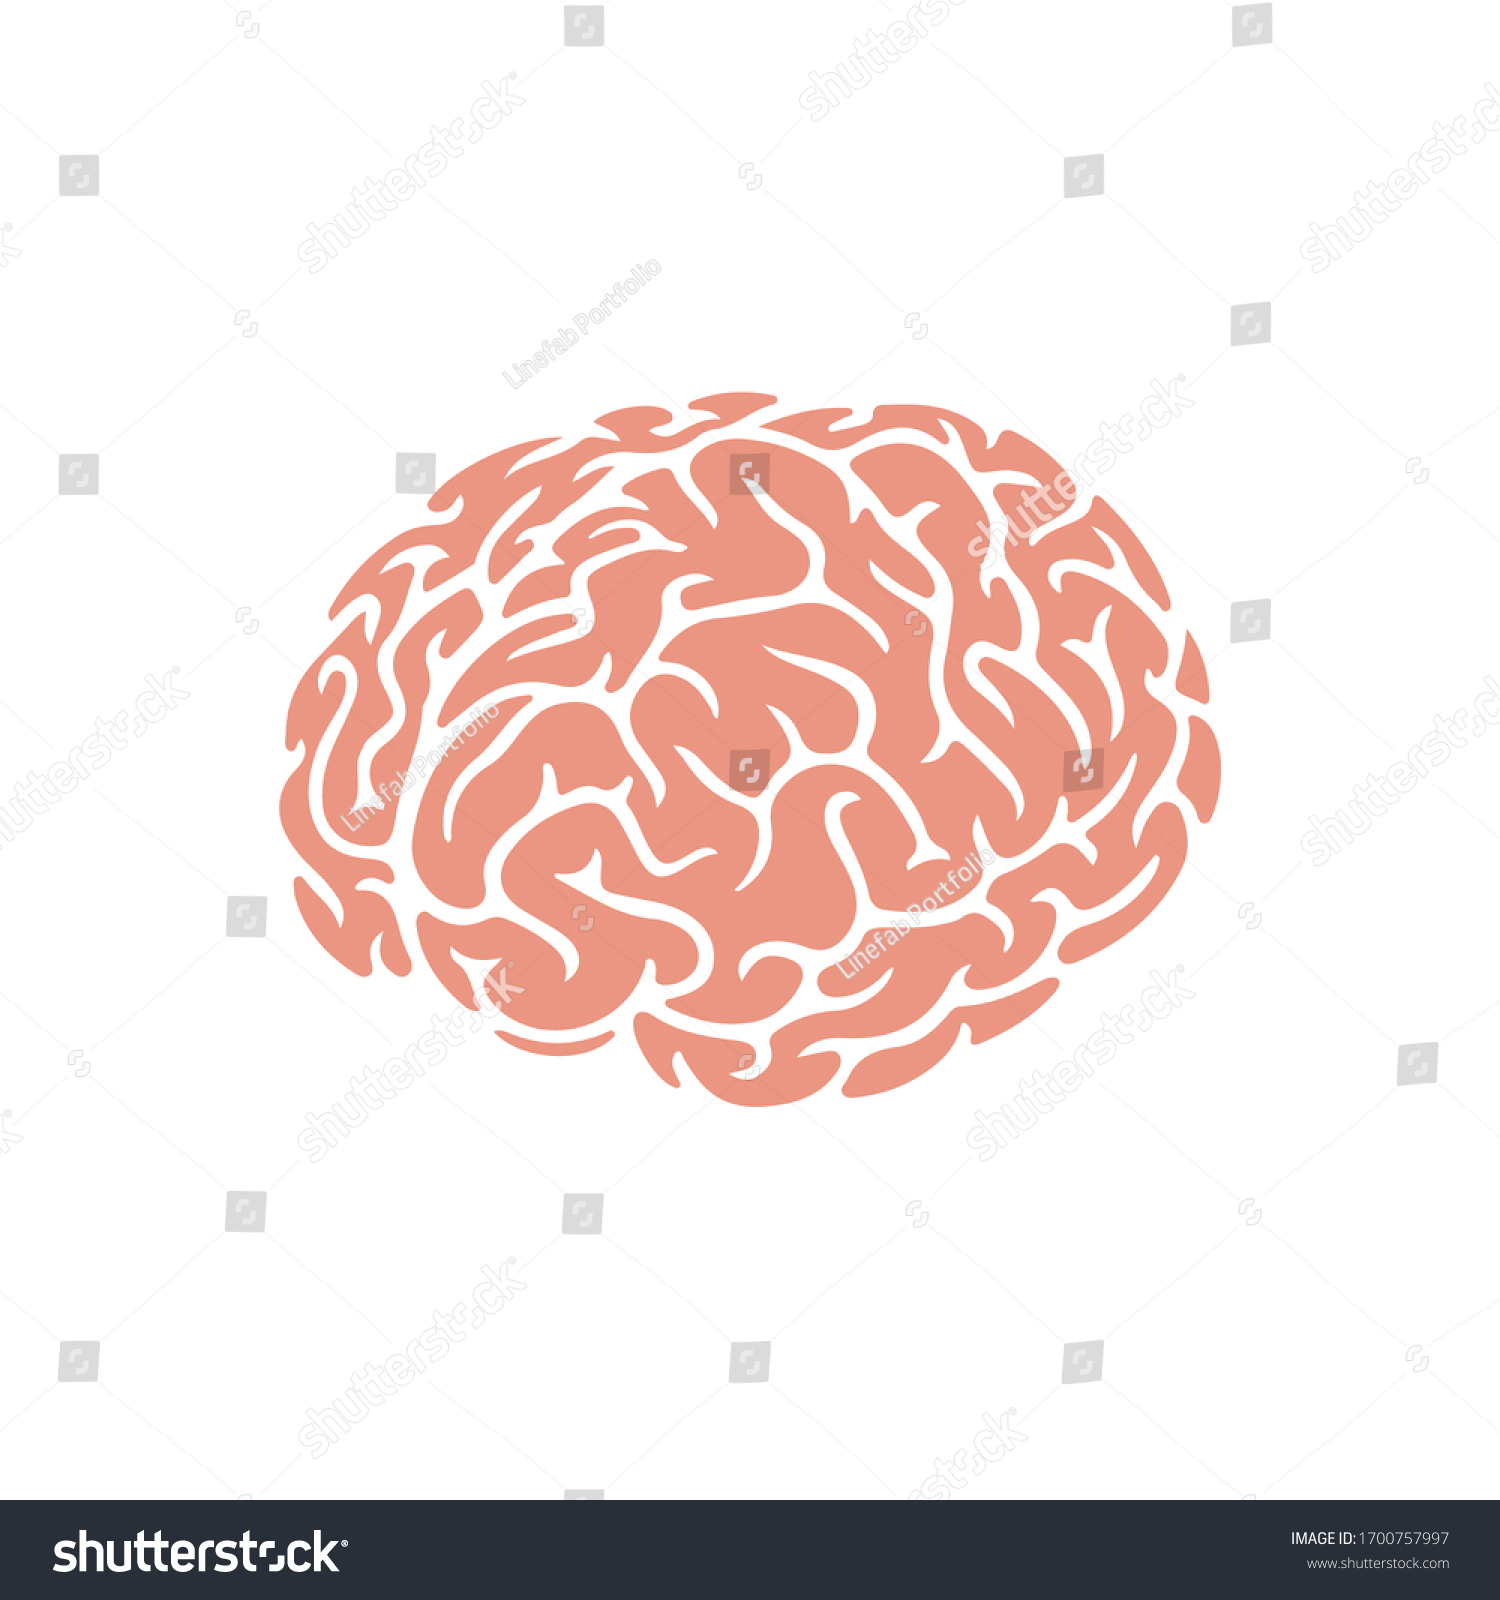 Brain Icon for Graphic Design Projects #1700757997